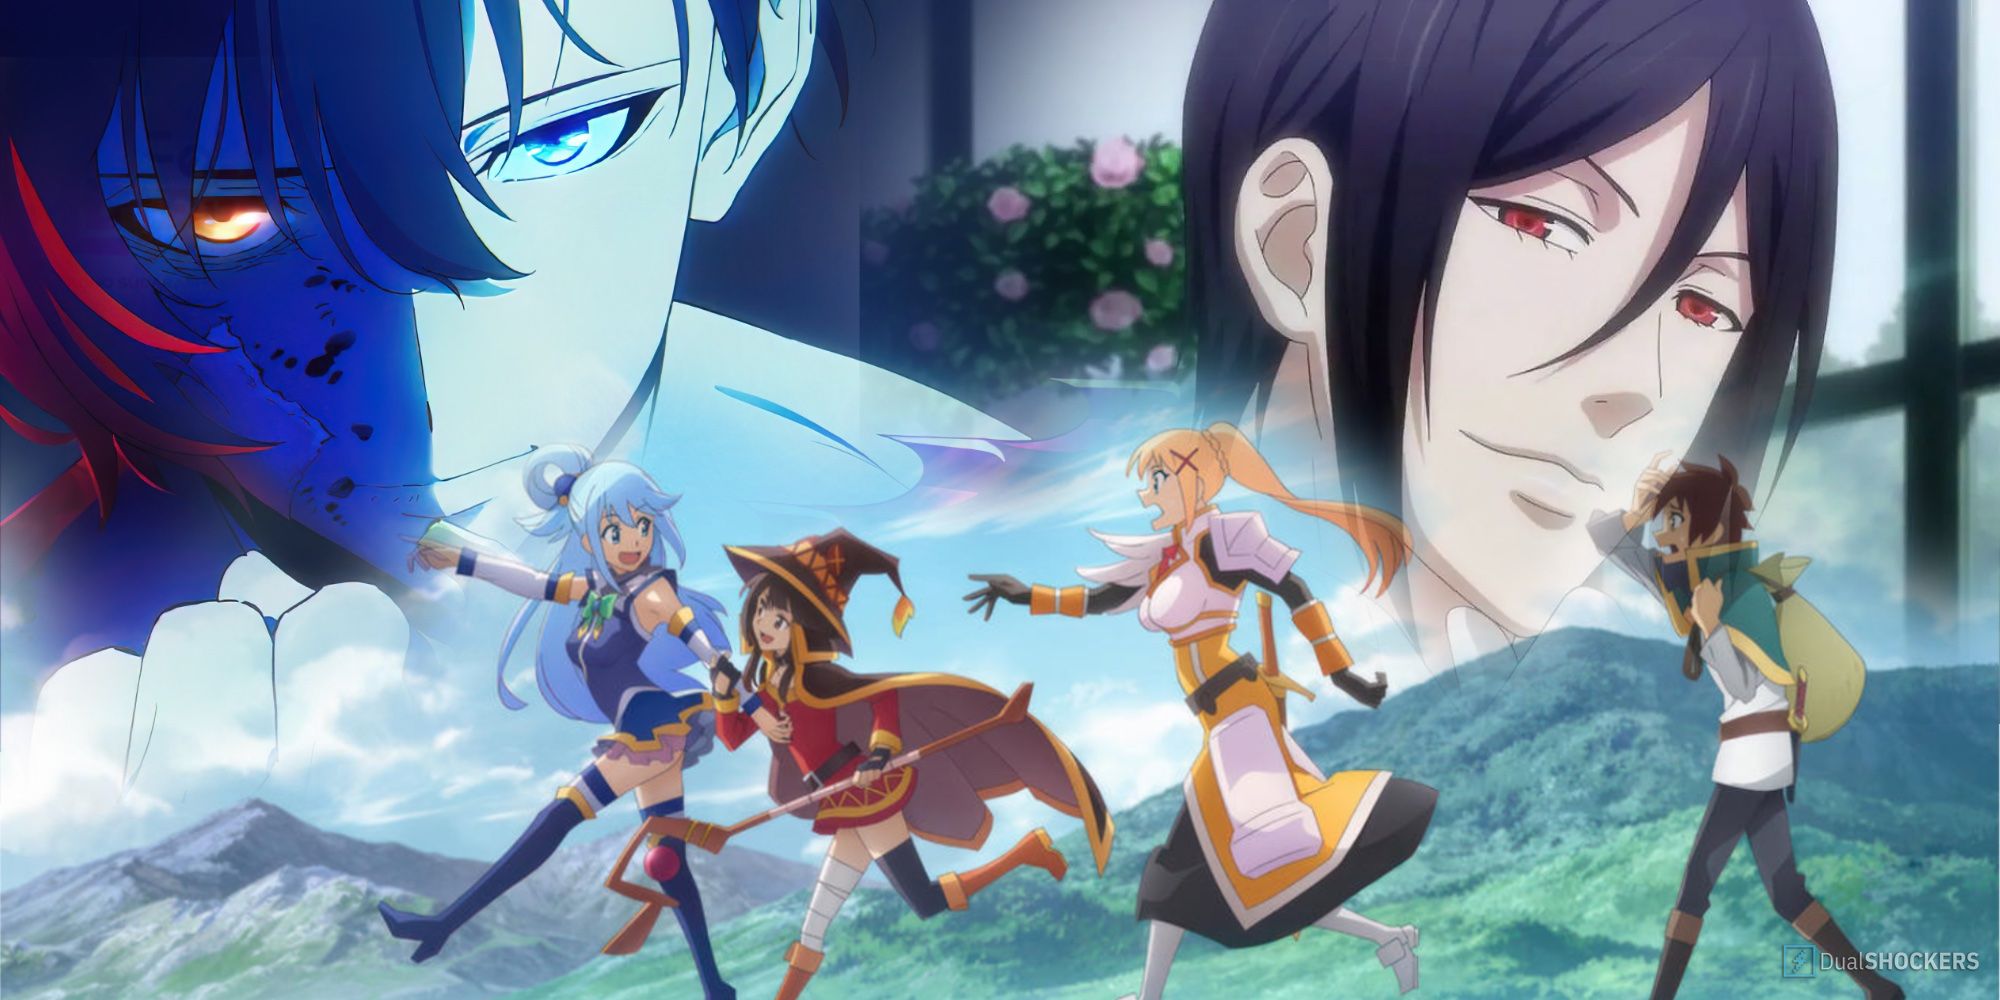 10 Anime Series to Watch While Waiting for Solo Leveling